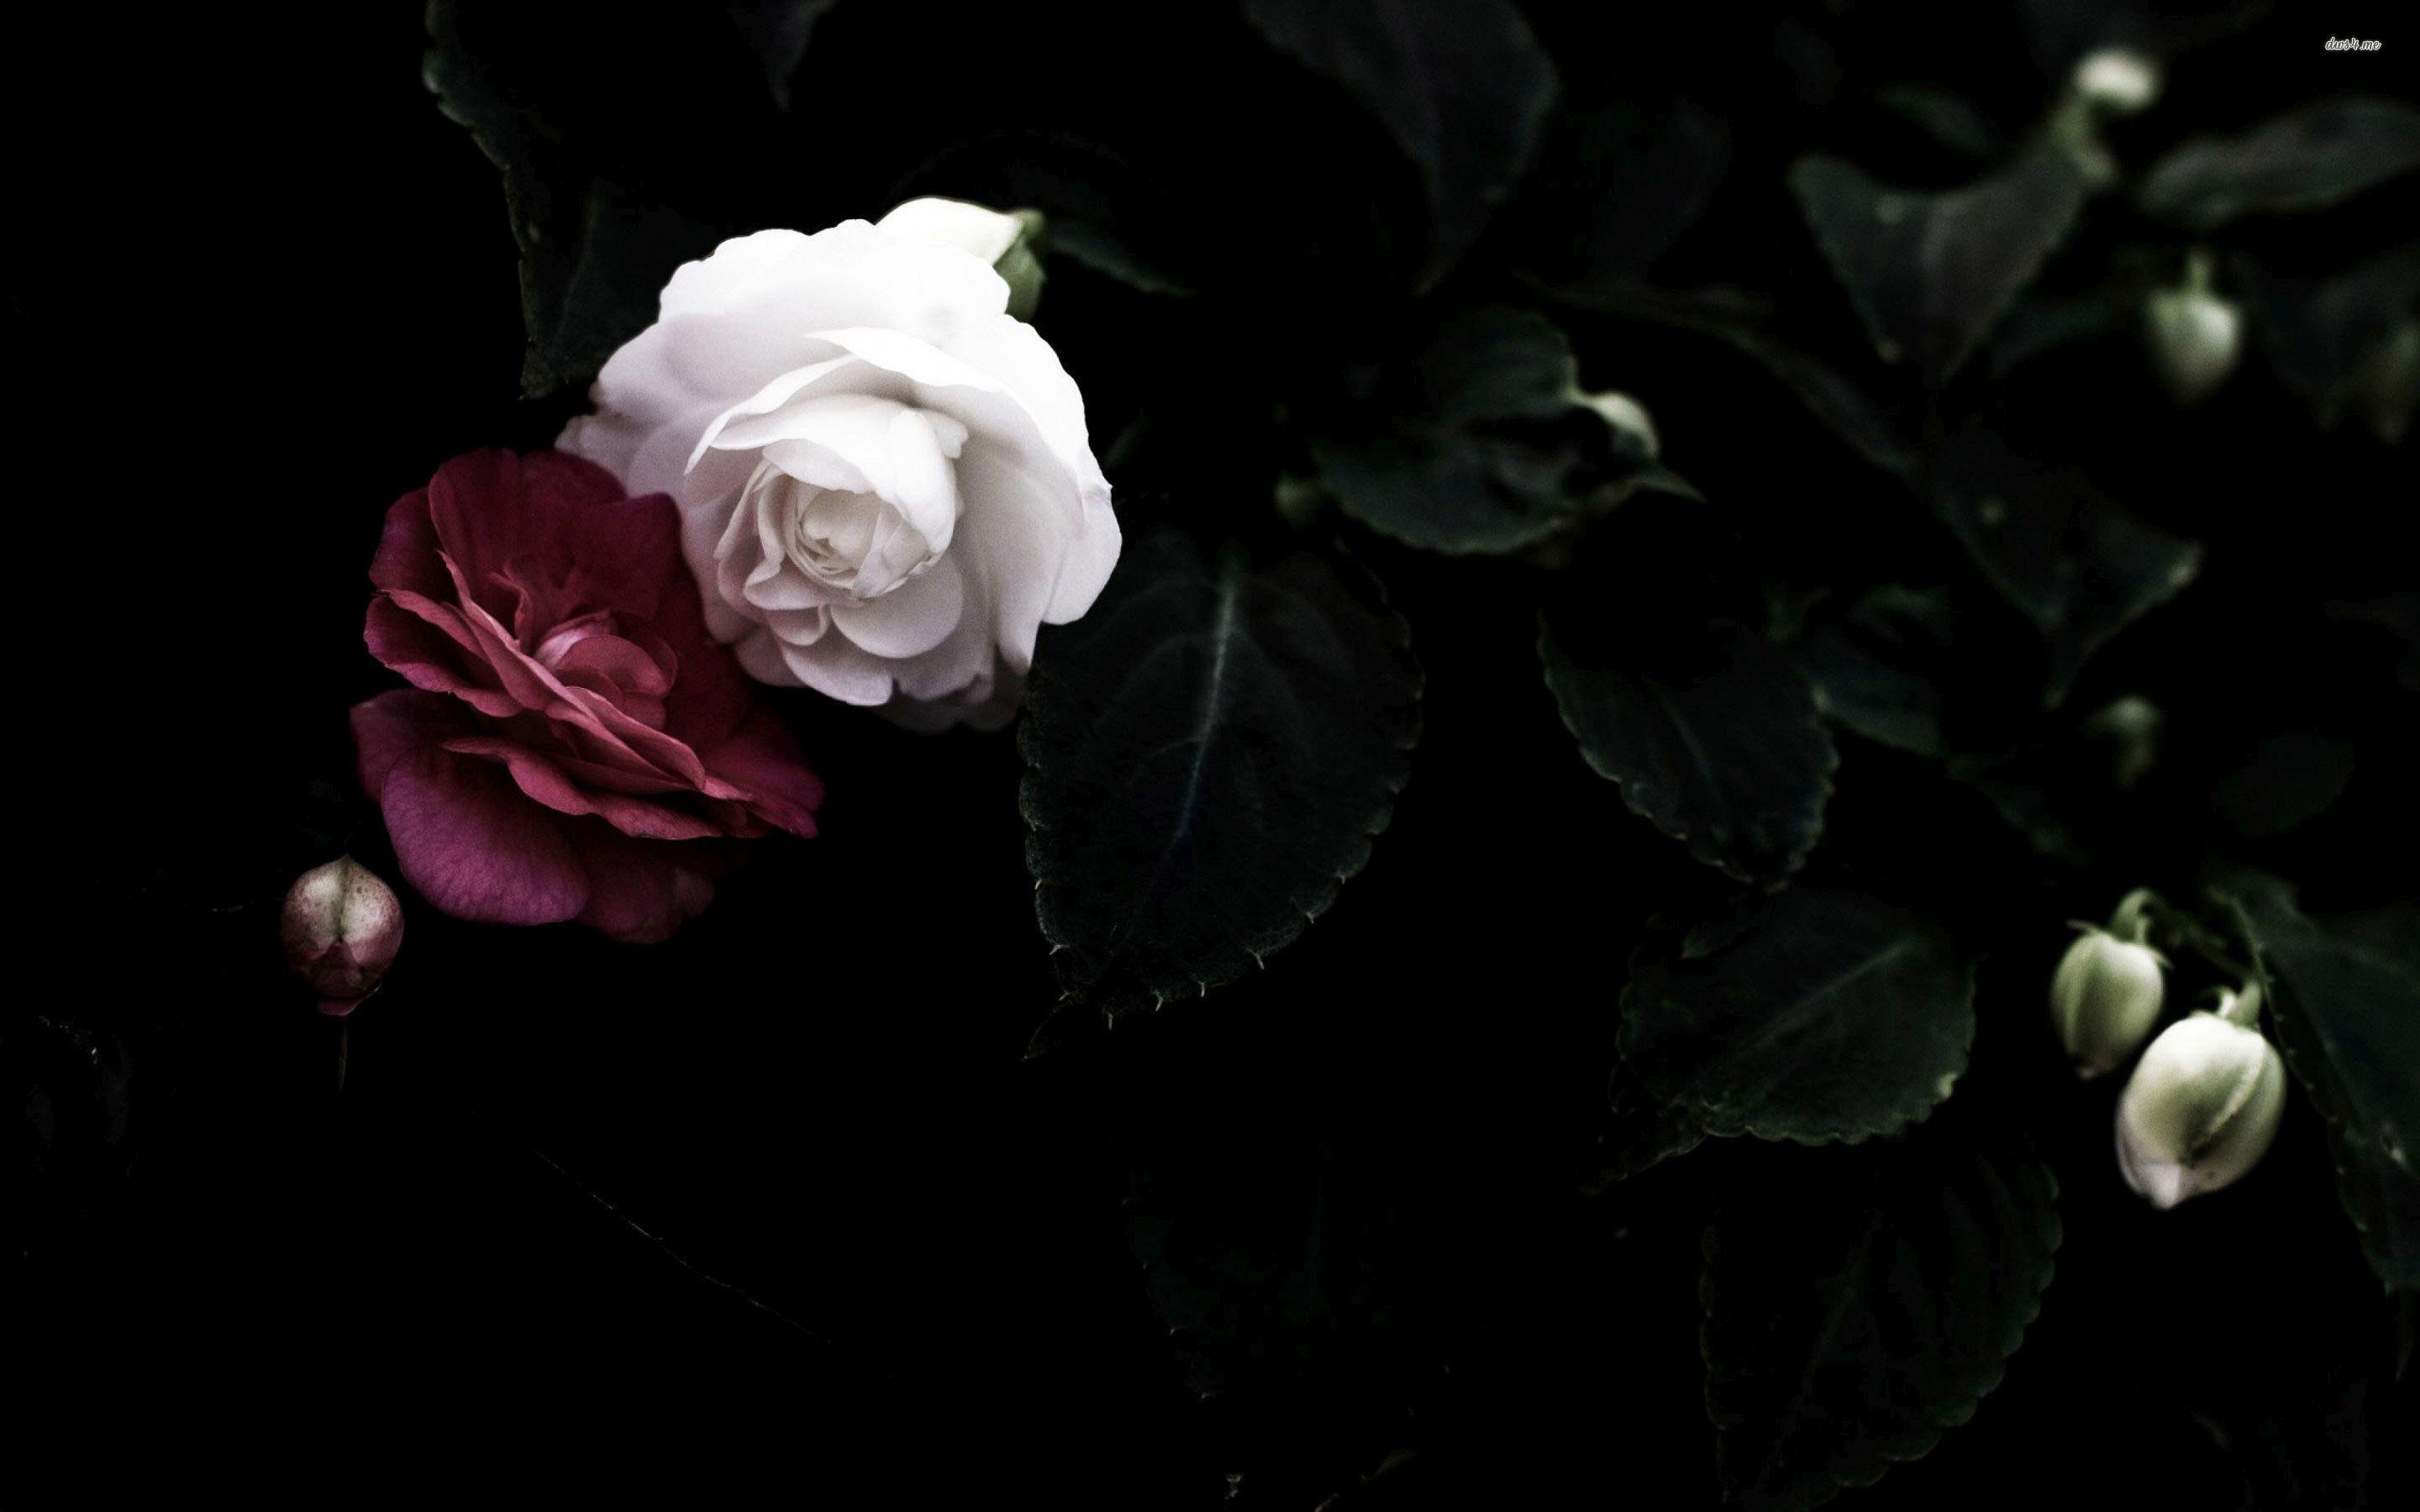 Flowers Darkness Wallpaper. Image Wallpaper Collections